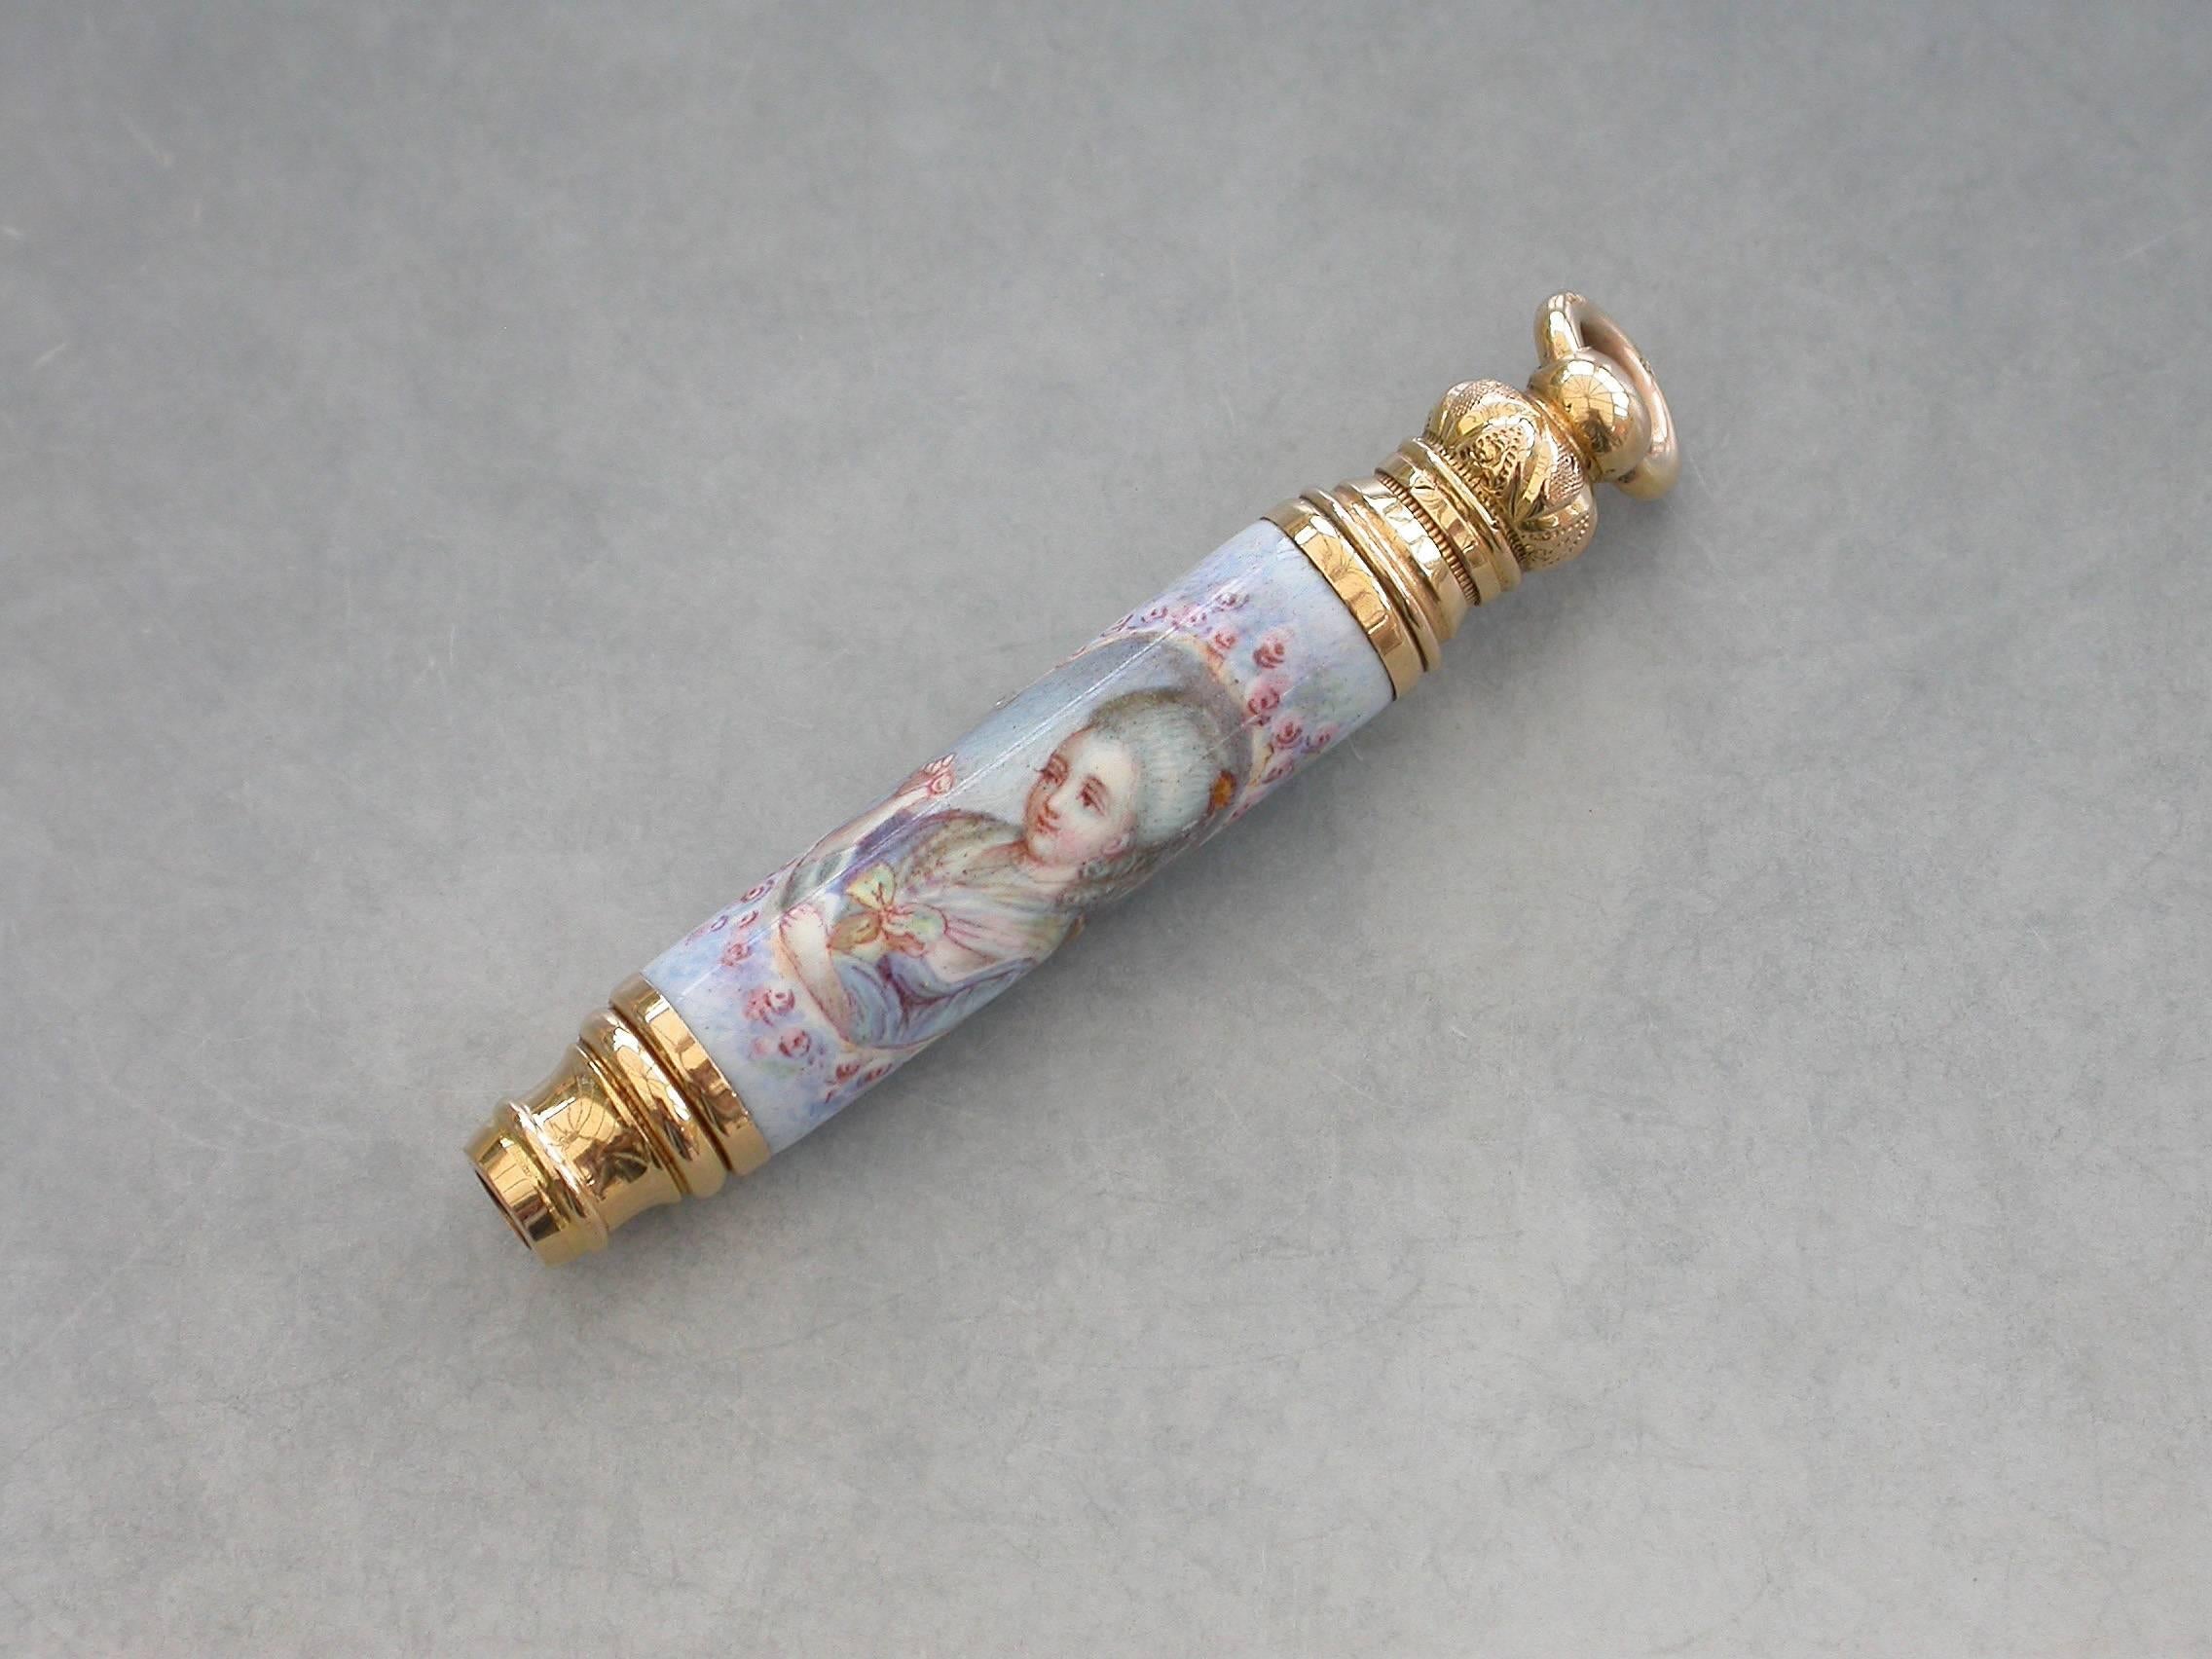 A fine quality late 19th century French high carat gold and enamel telescopic Propelling Pencil decorated with a portrait of a lady in an oval reserve surrounded by flowers on a pale blue ground.

French circa 1880. Marked on the attached